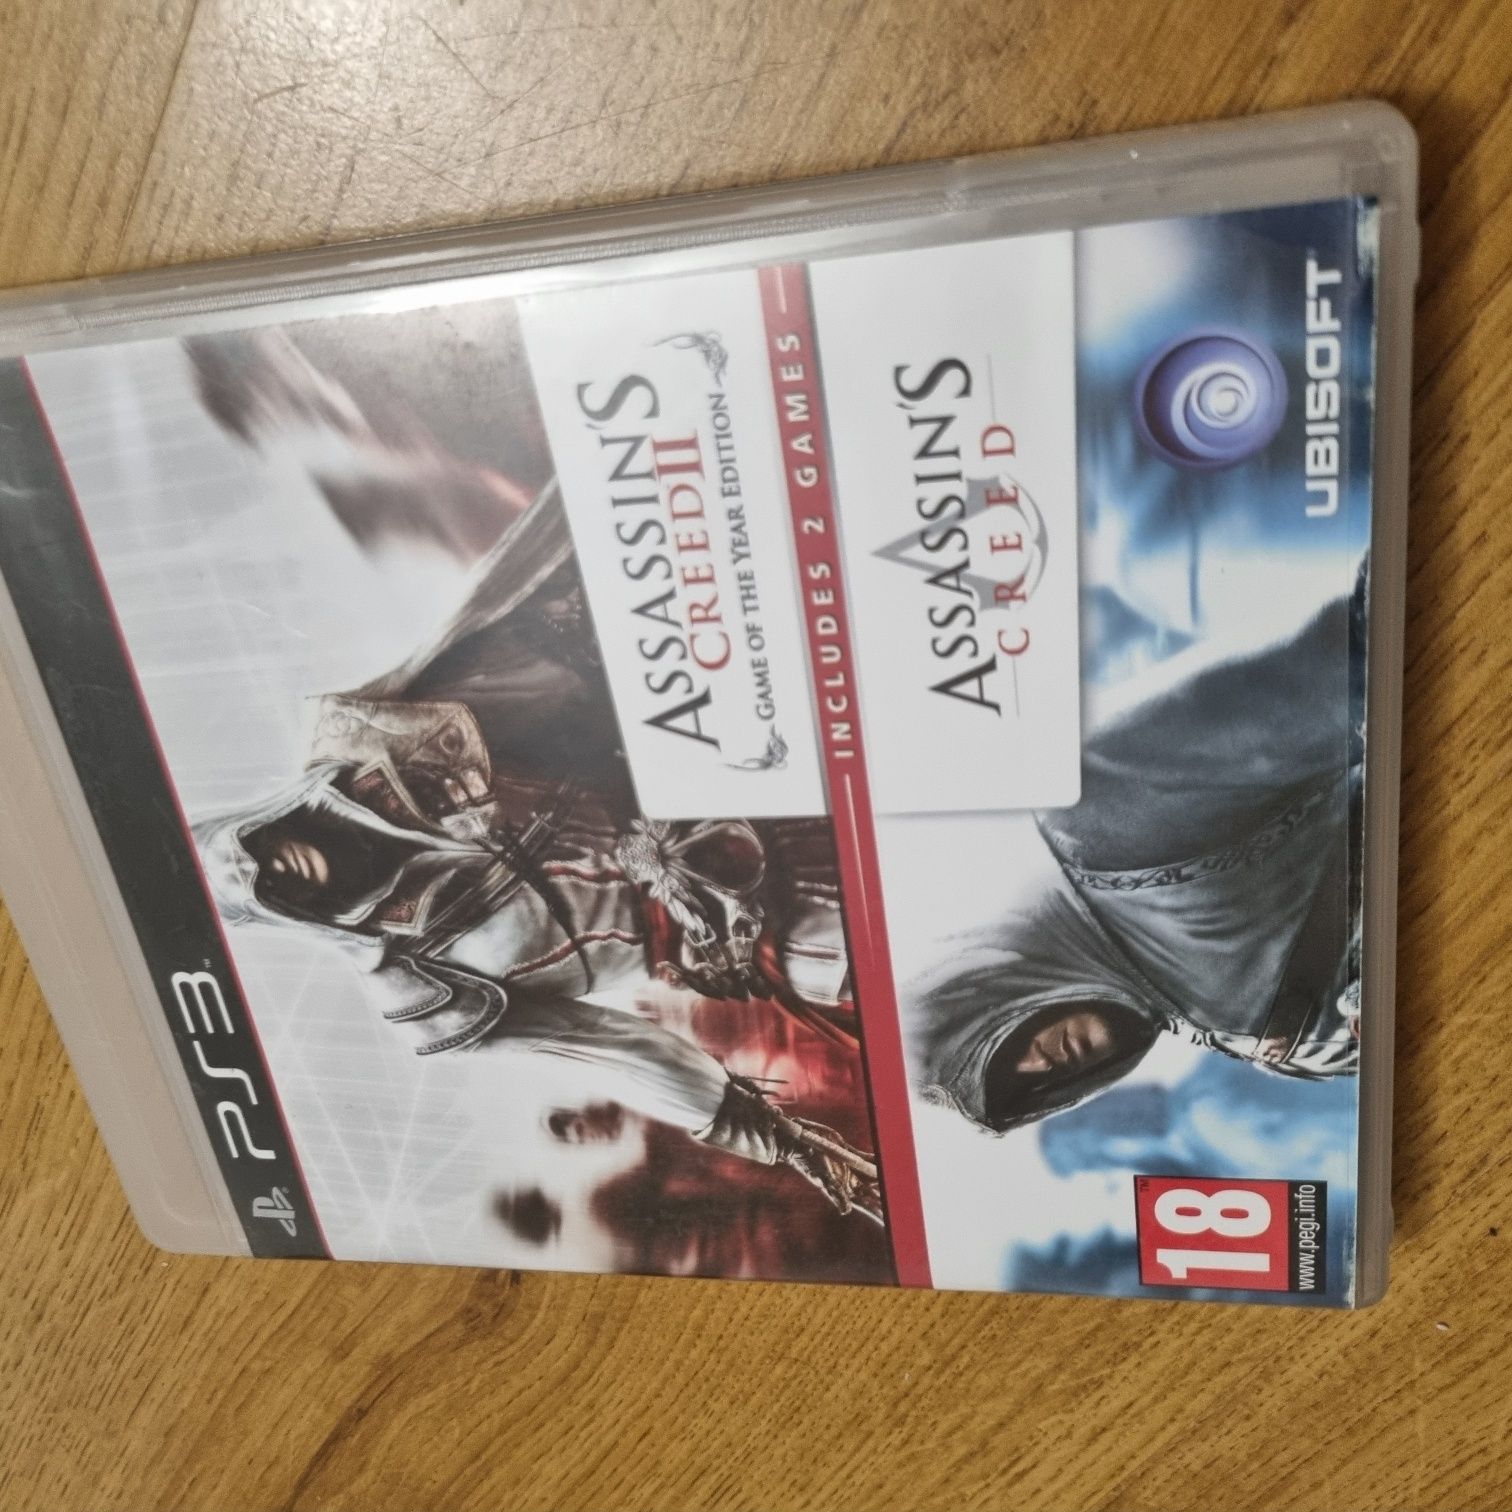 Assassins creed 2 Game of The Year Edition + Assassins creed